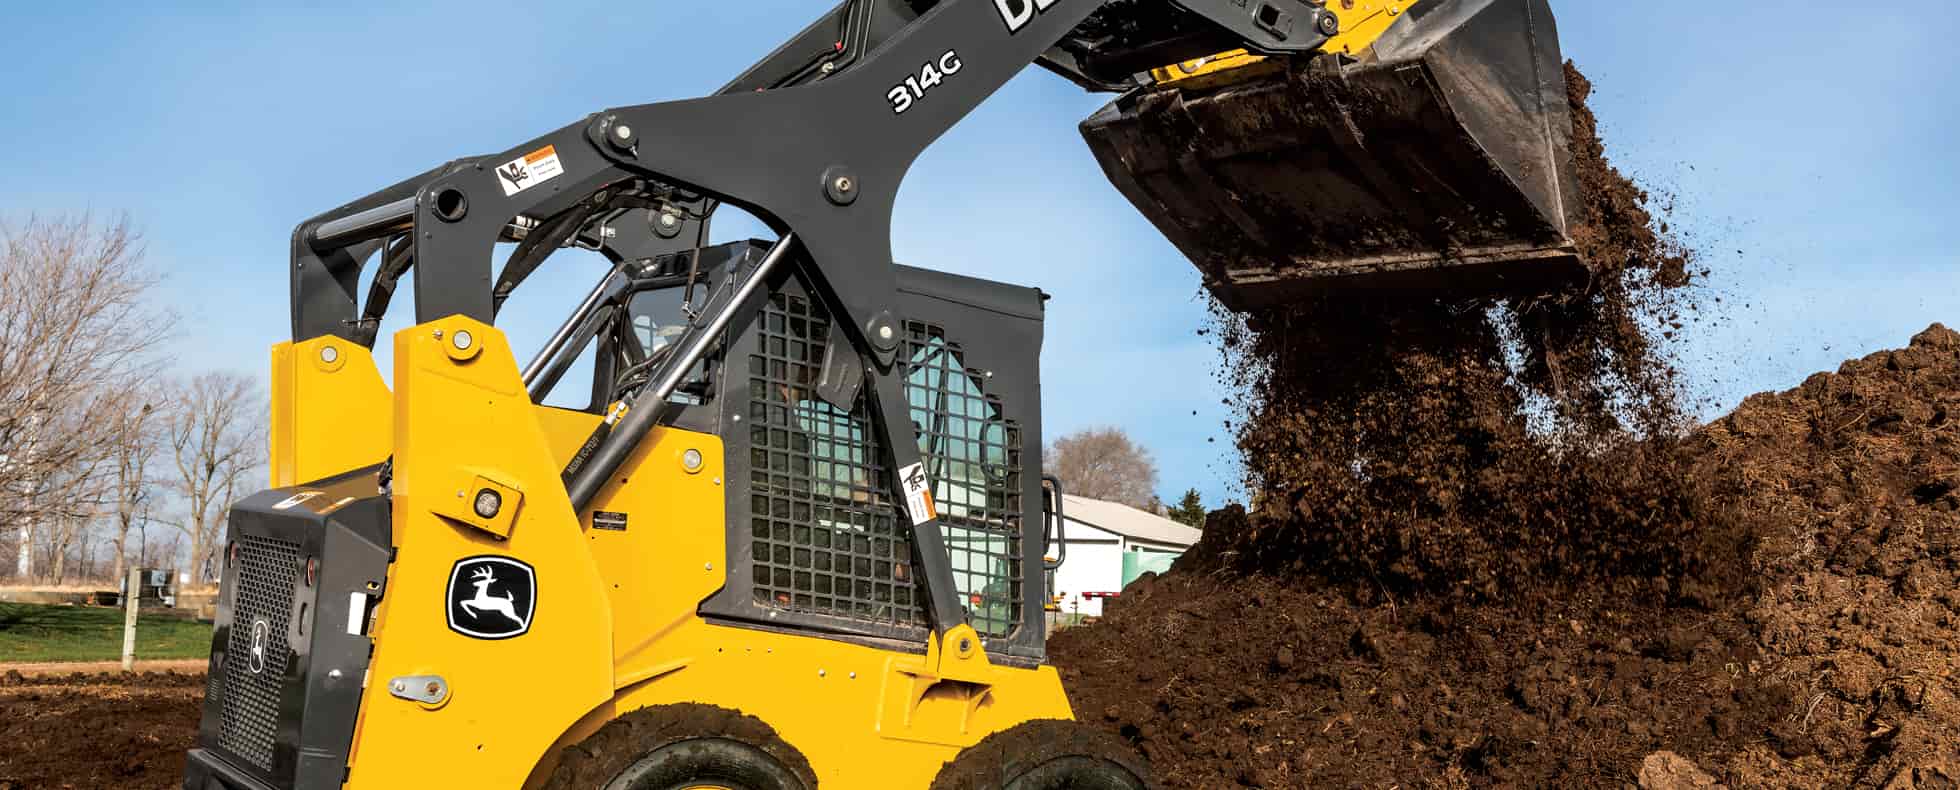 Prepare for Fall and Winter Landscaping Projects with These Attachments